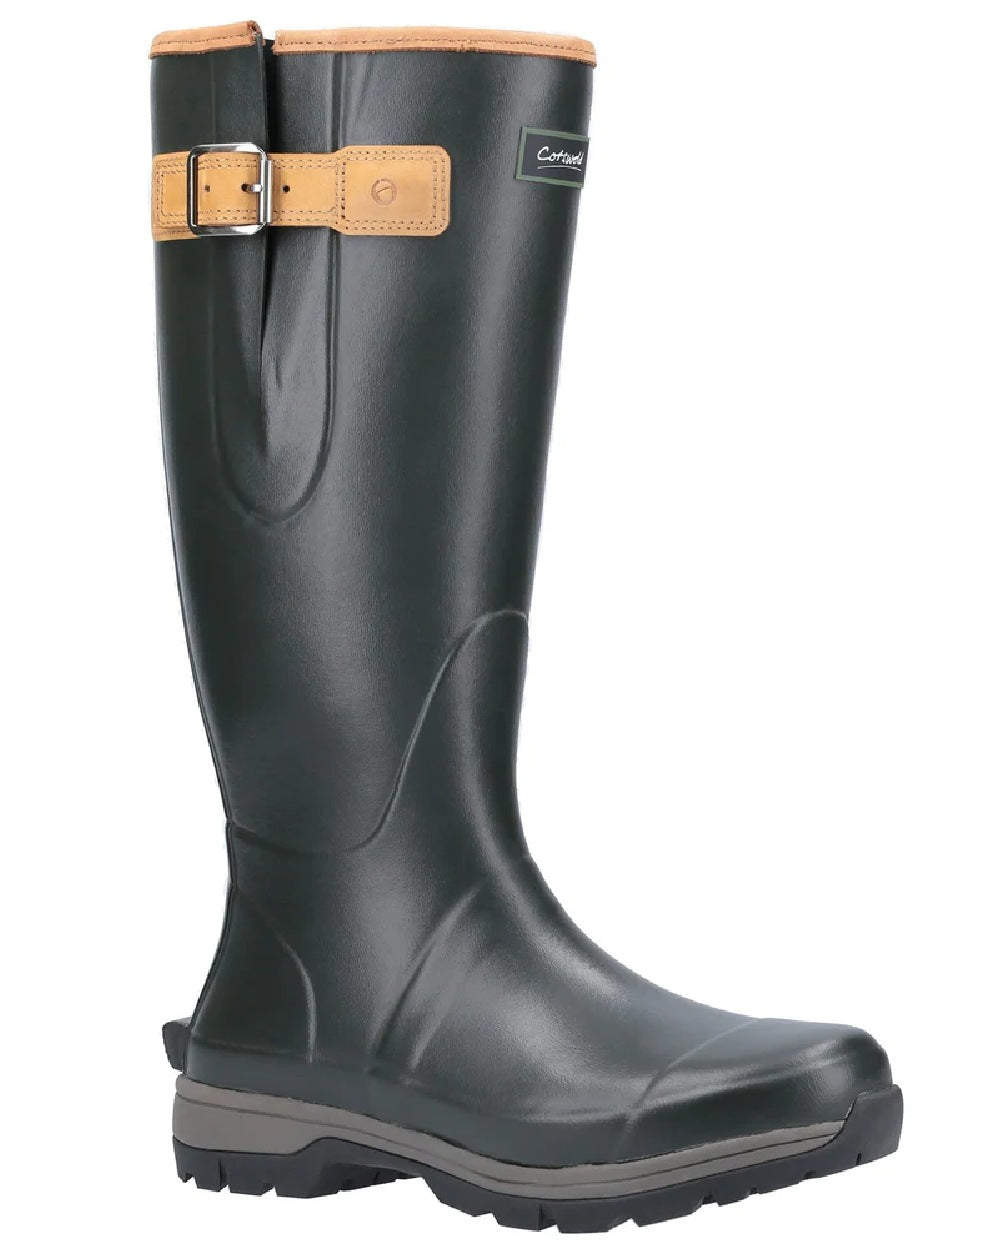 Cotswold Stratus Wellington Boots in Green 